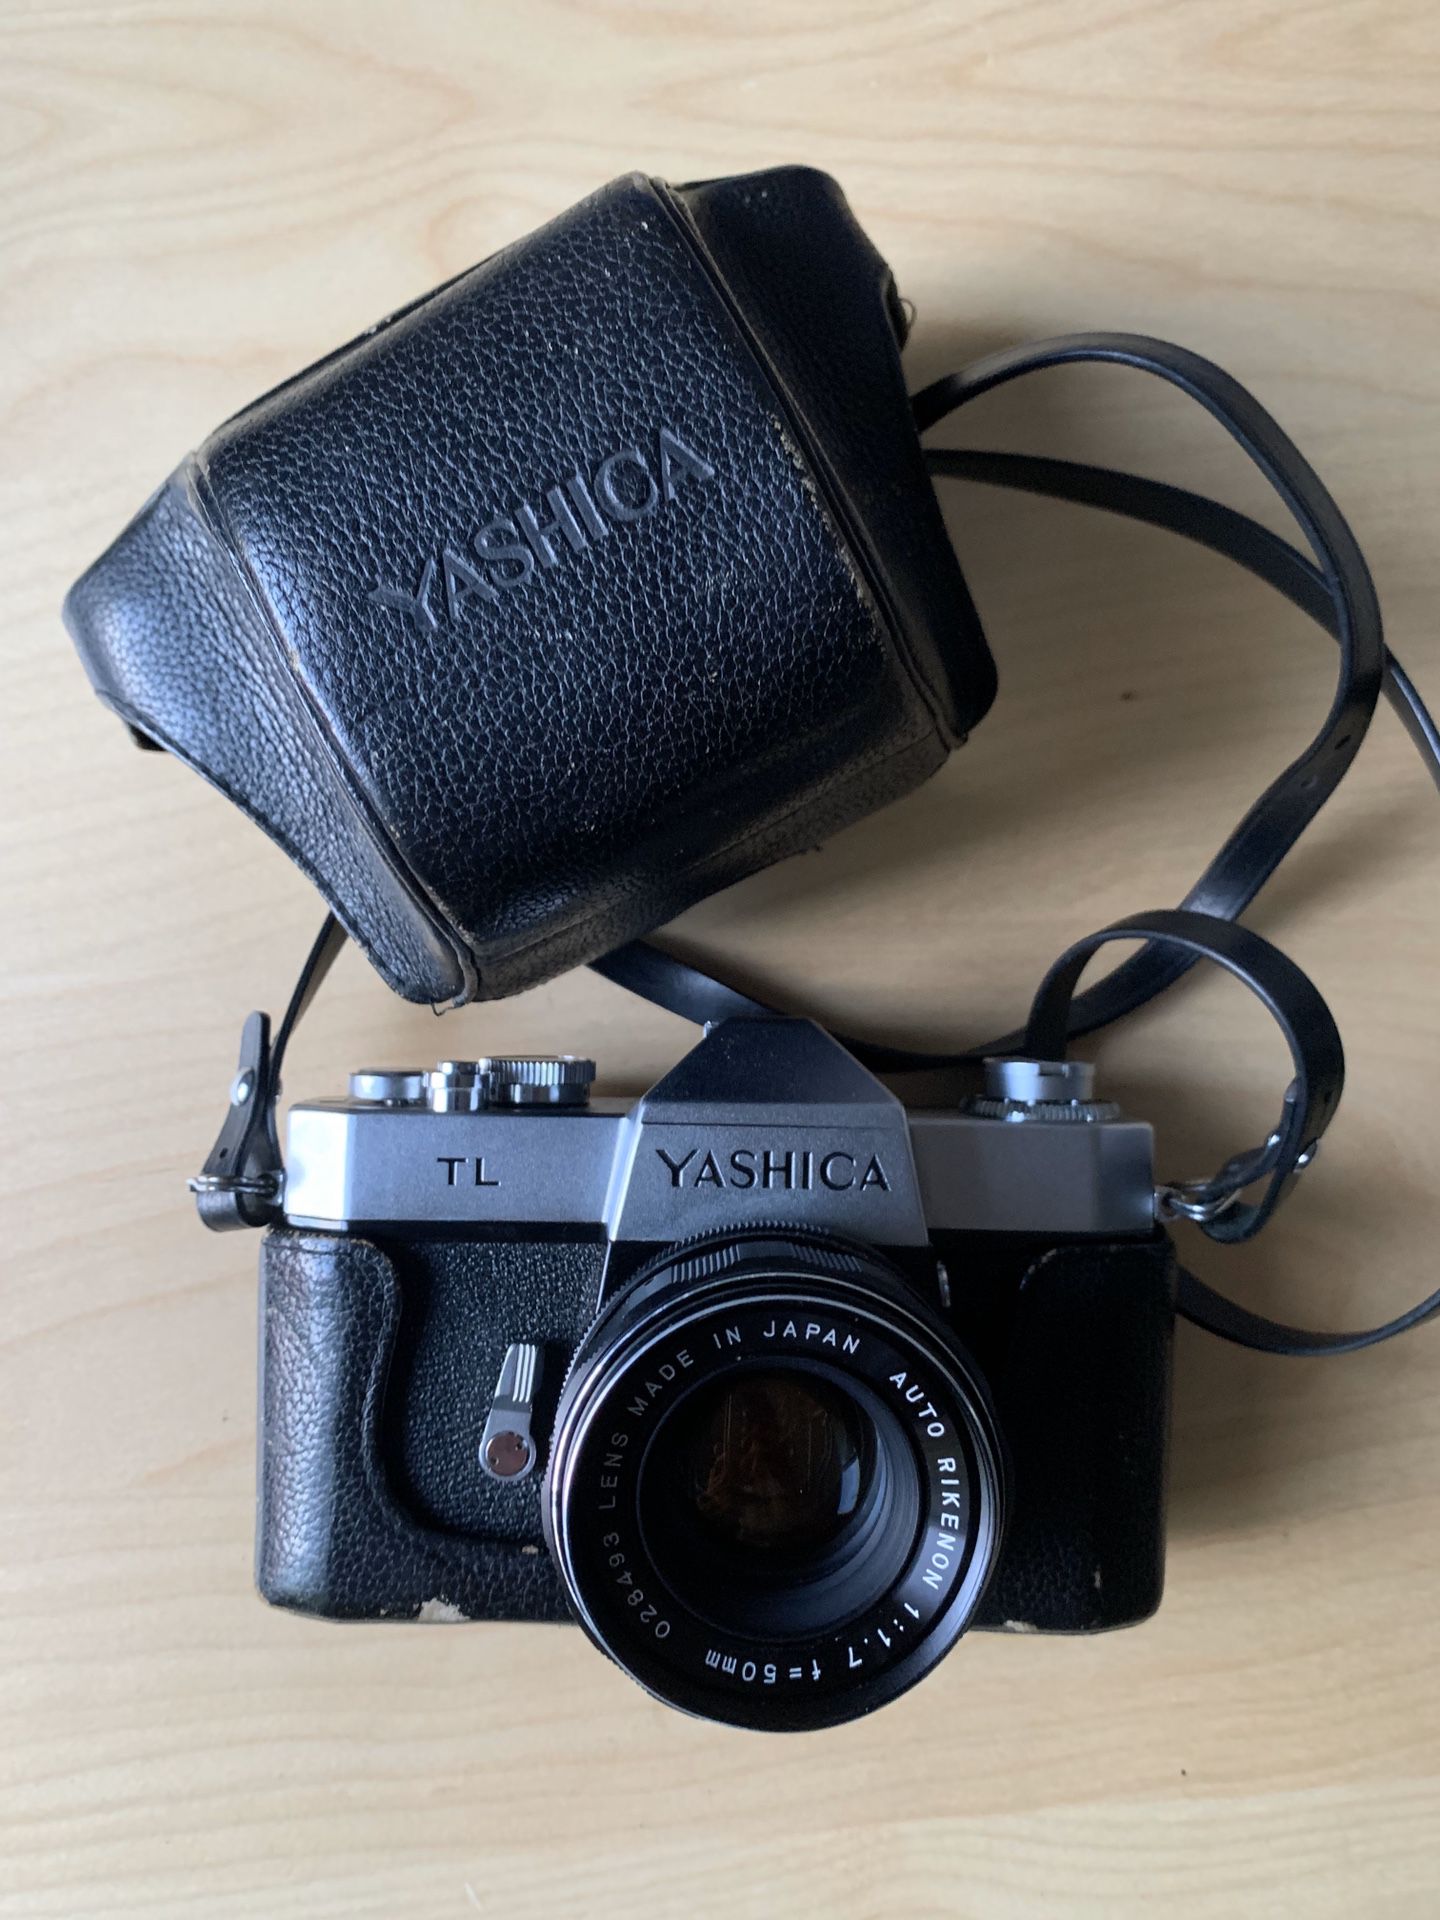 Yashica TL, 35mm film camera, with case and strap